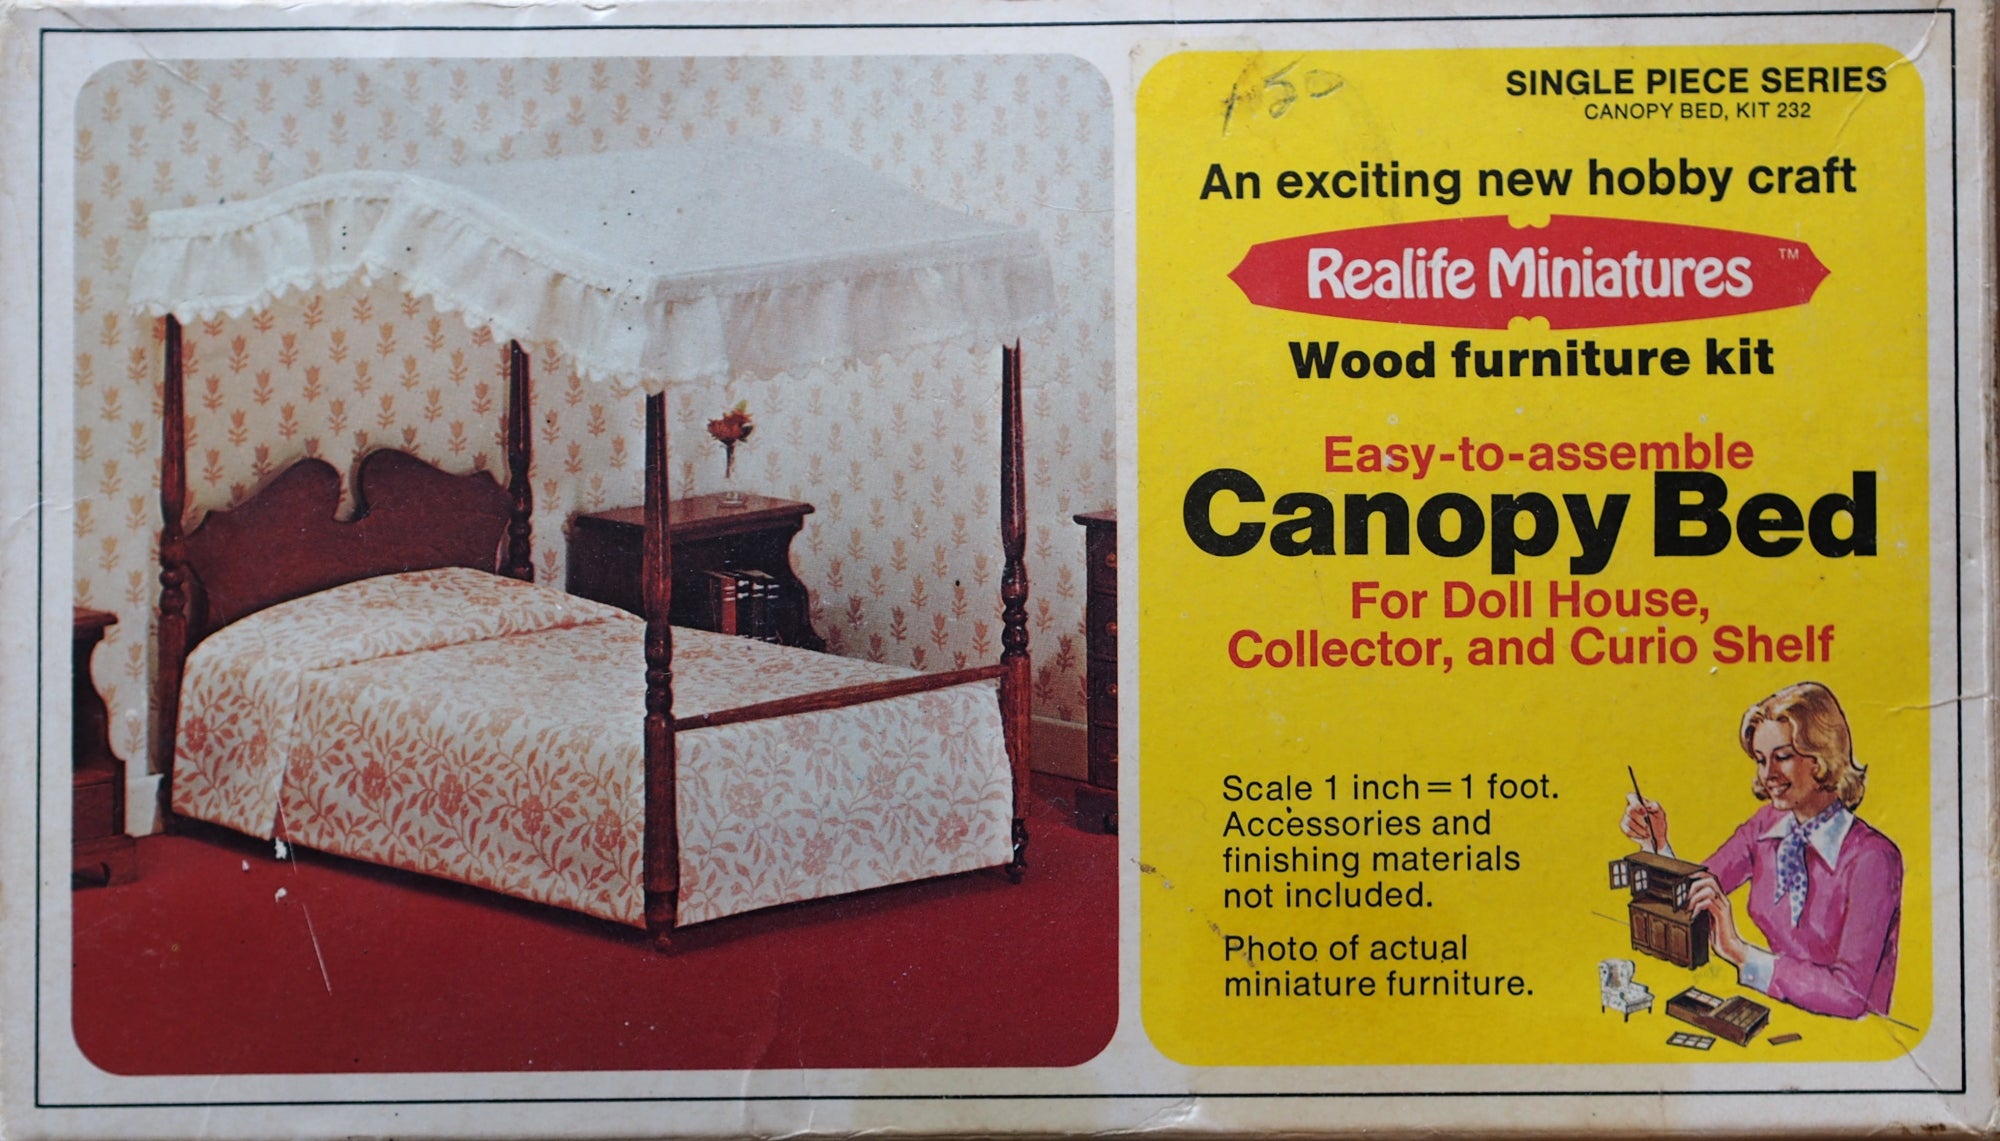 Realife Miniature Furniture Kit # 232 Single Piece Series Canopy Bed DIY Dollhouse by Scientific Models Miniatures